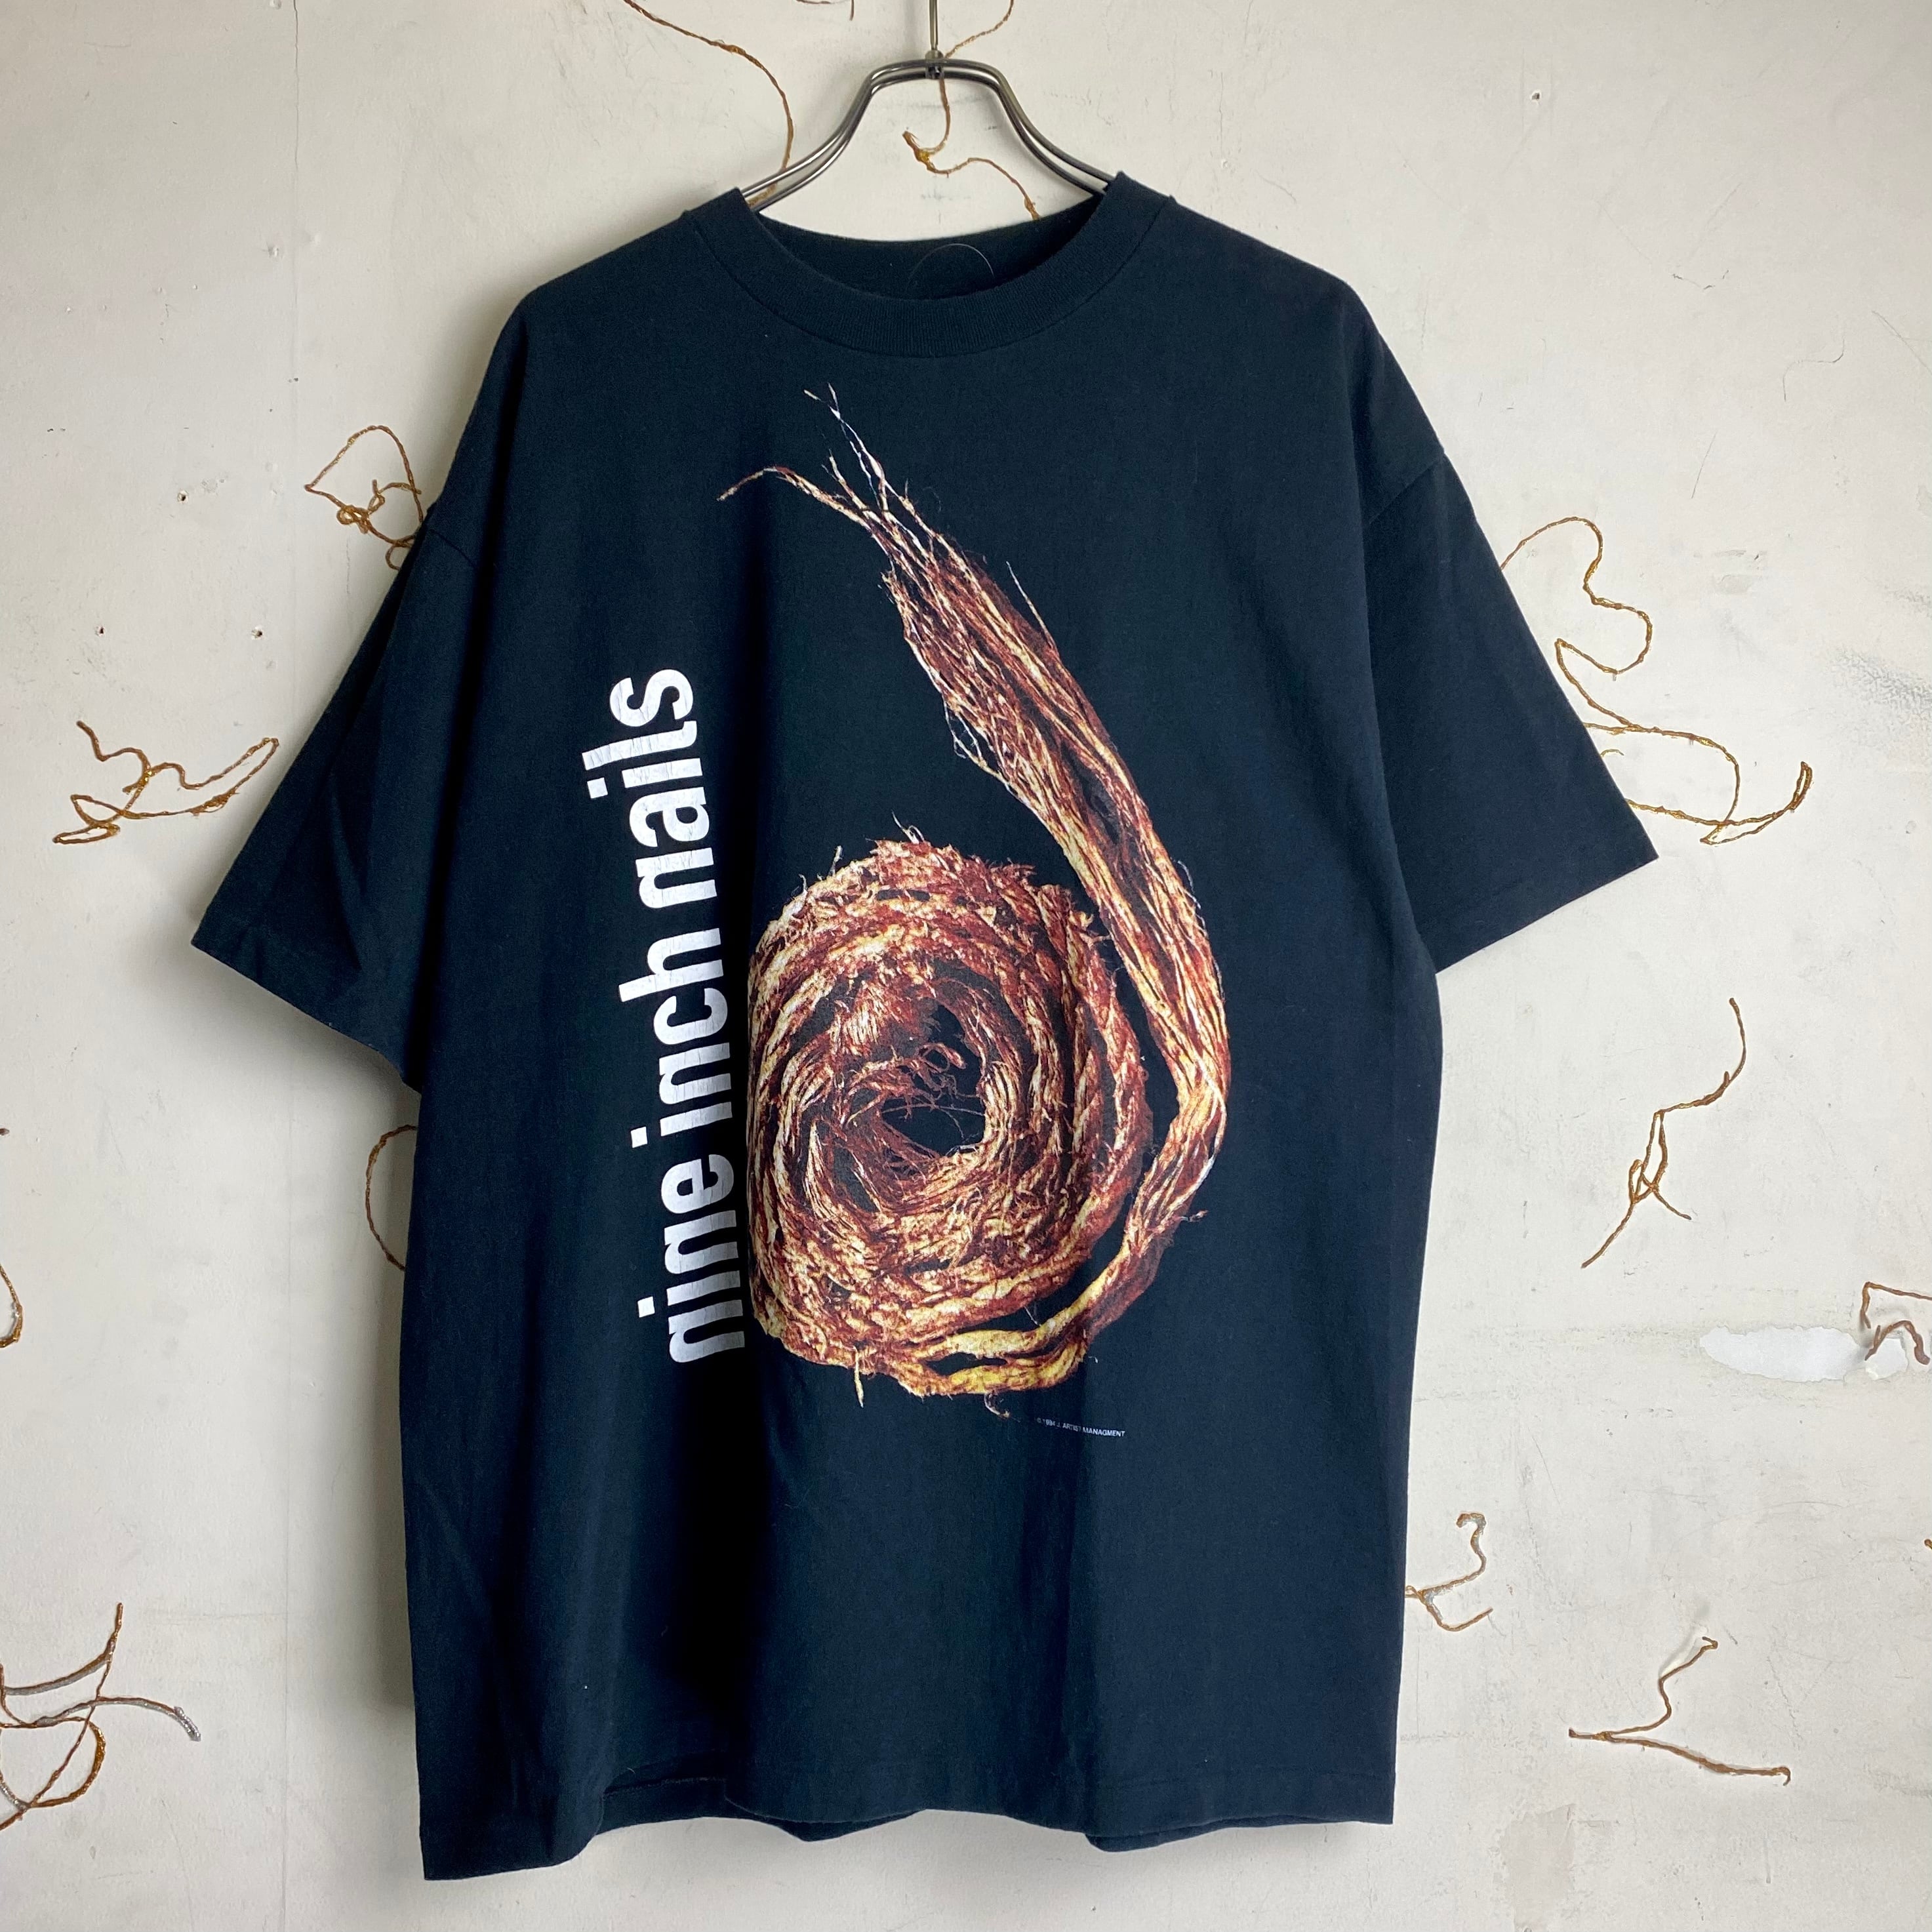 vintage 's NINE INCH NAILS music tee “Further Down The Spiral